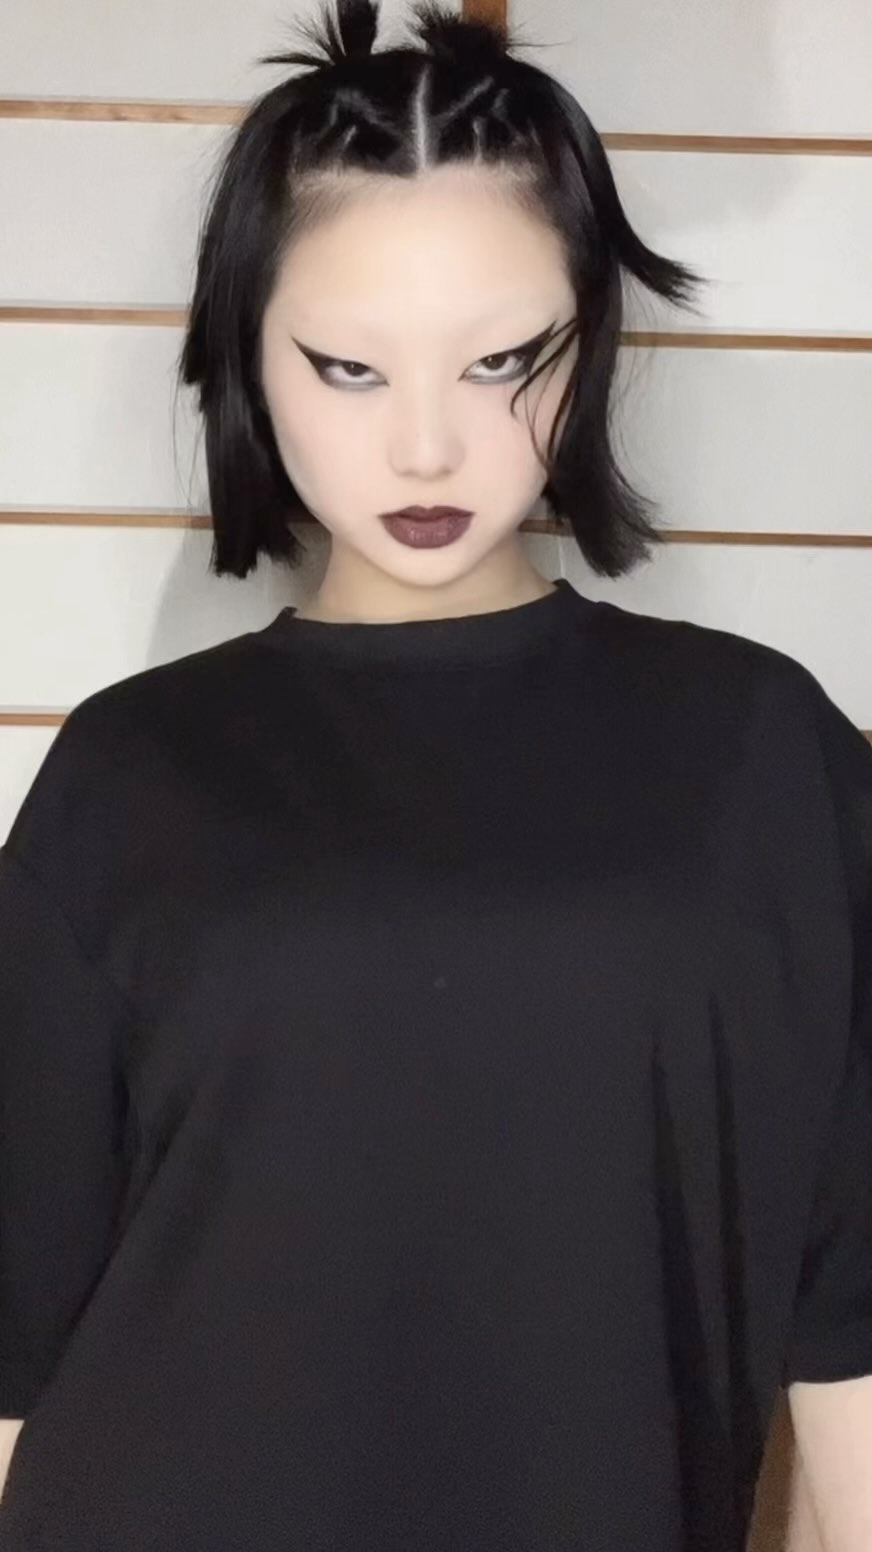 Mochi Skin: Embracing the Velvety Complexion Trend with a Gothic Twist